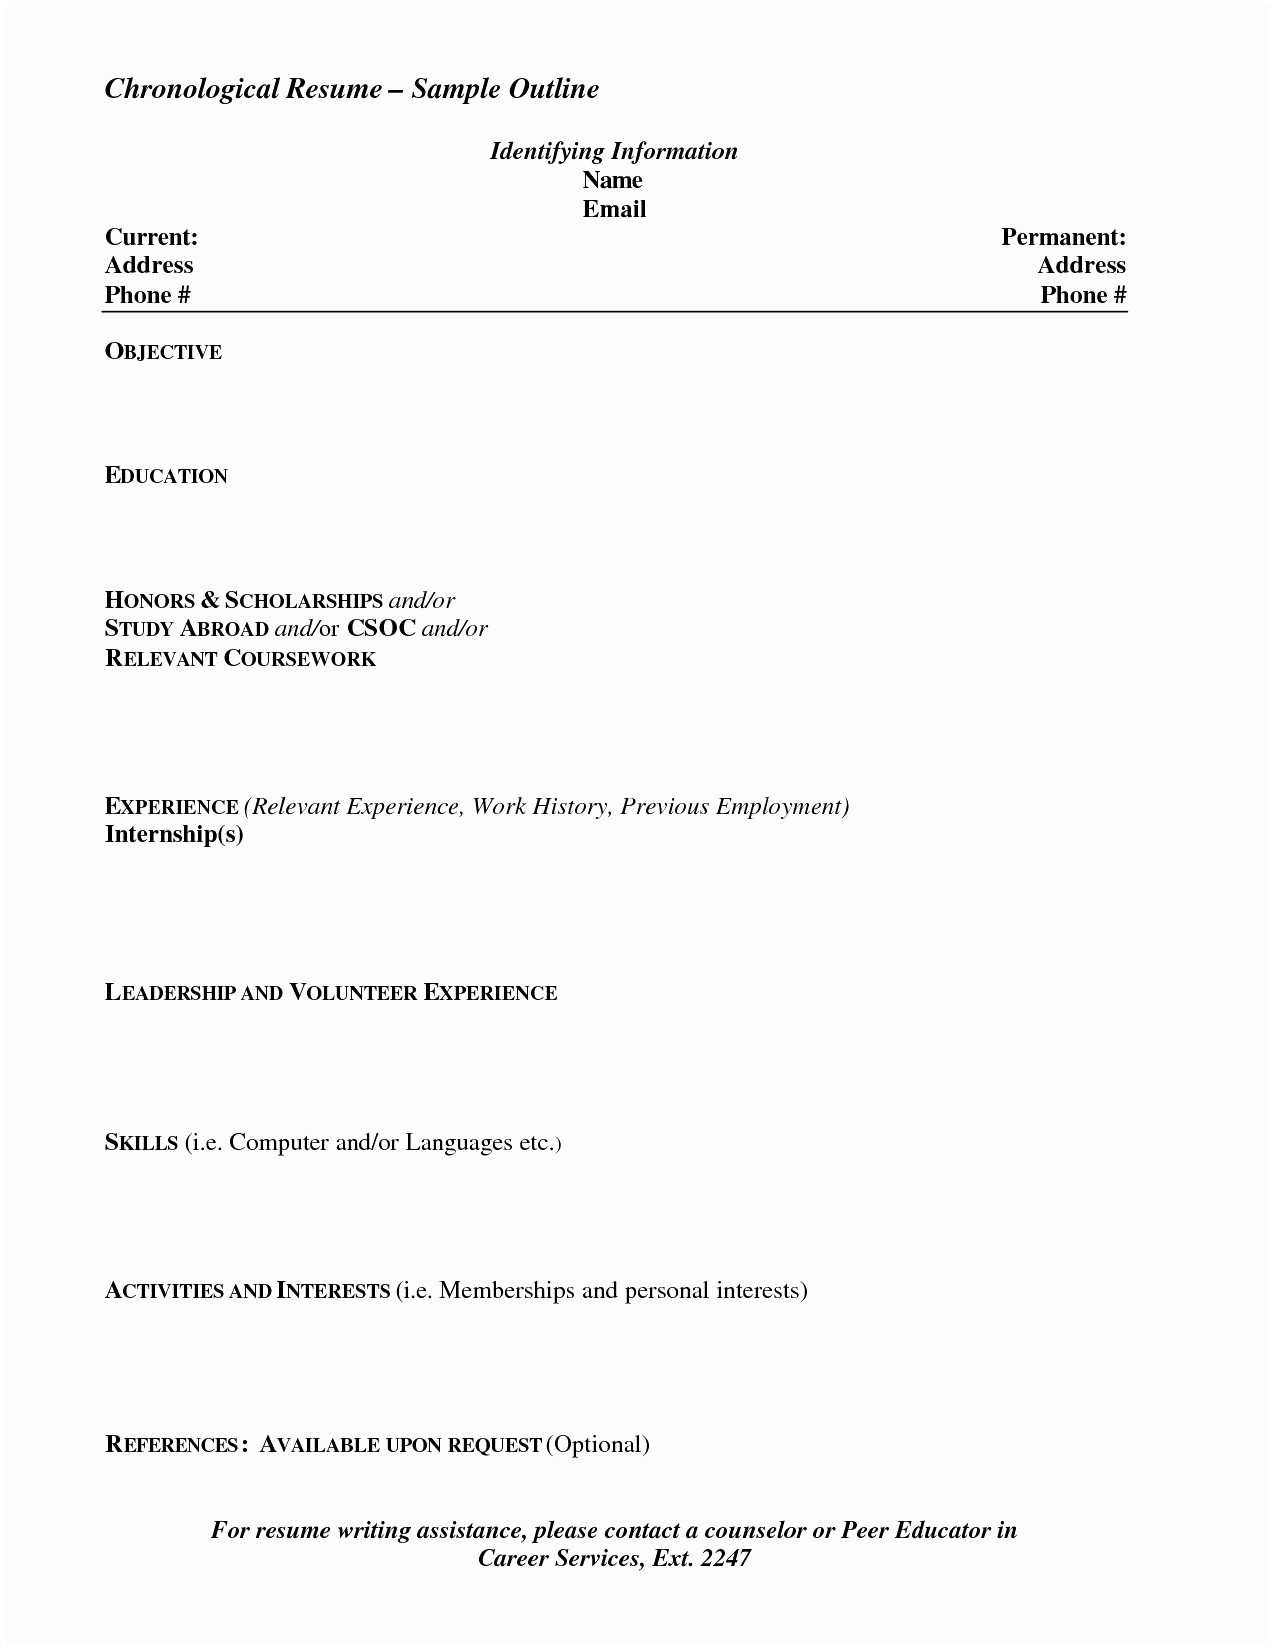 Letter Of Intent Template - Letter Intent to Purchase A Business